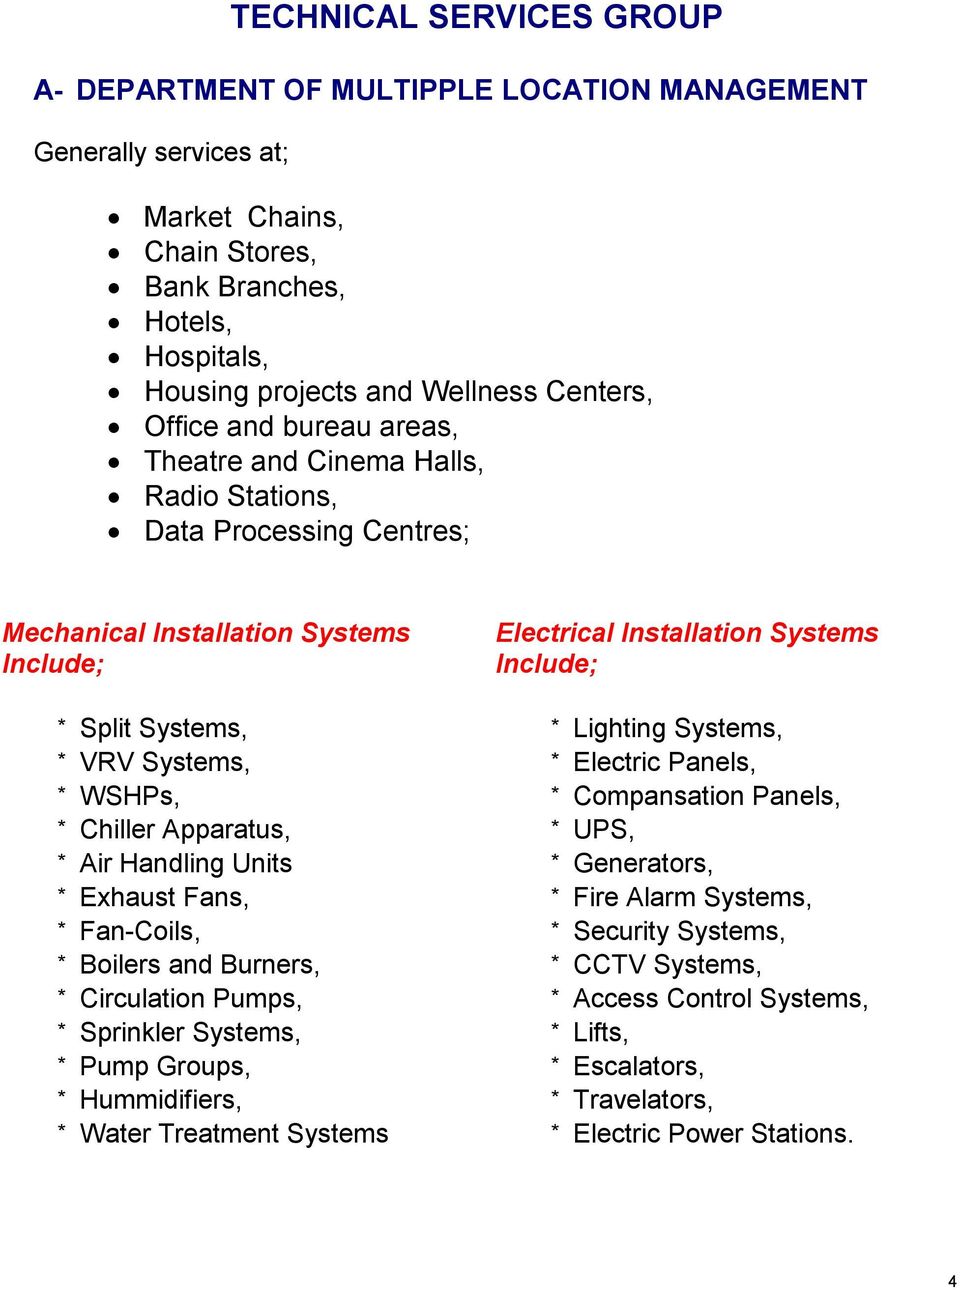 Lighting Systems, * VRV Systems, * Electric Panels, * WSHPs, * Compansation Panels, * Chiller Apparatus, * UPS, * Air Handling Units * Generators, * Exhaust Fans, * Fire Alarm Systems, * Fan-Coils, *